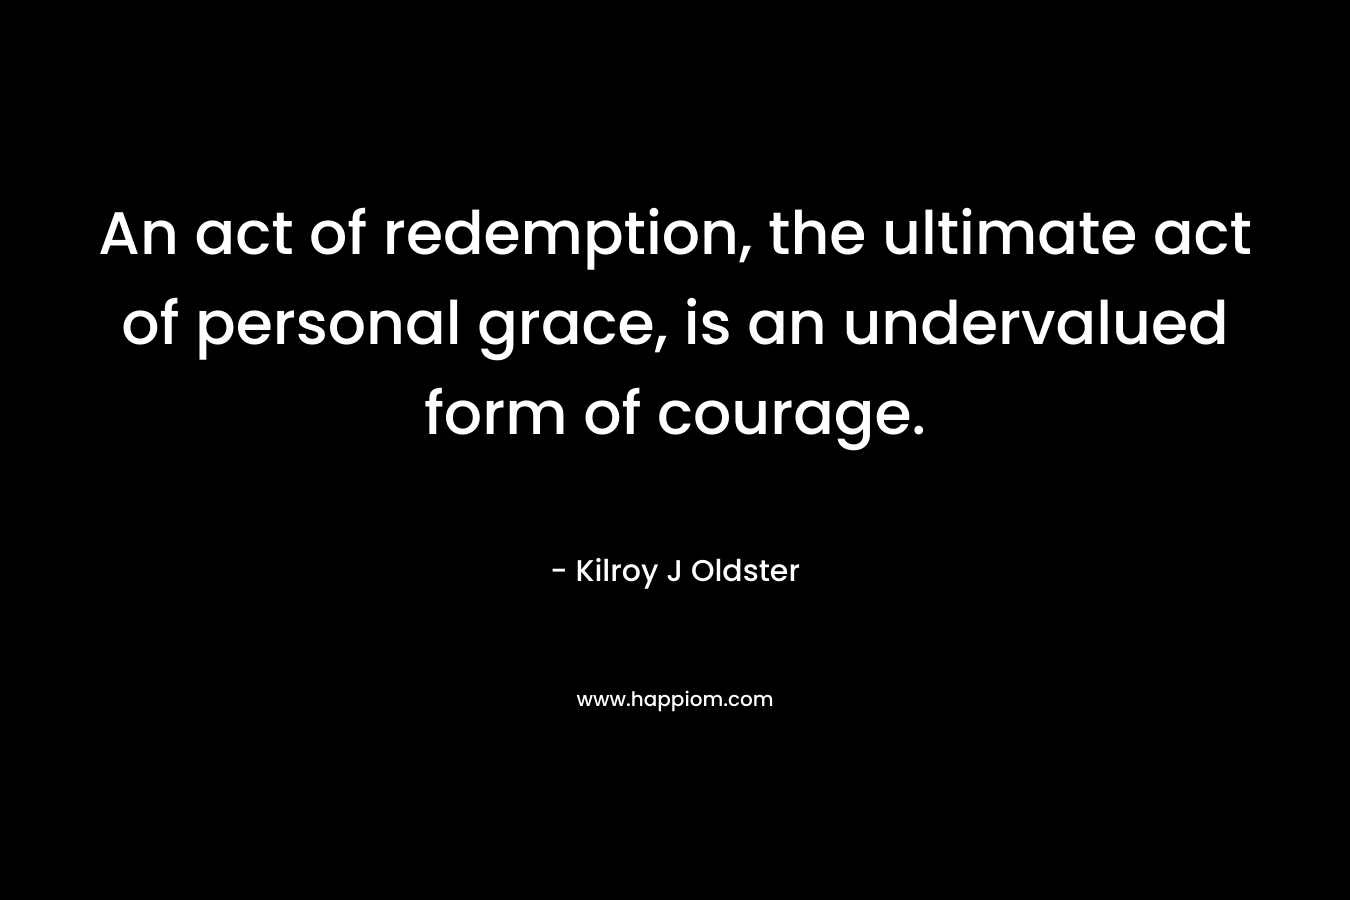 An act of redemption, the ultimate act of personal grace, is an undervalued form of courage.